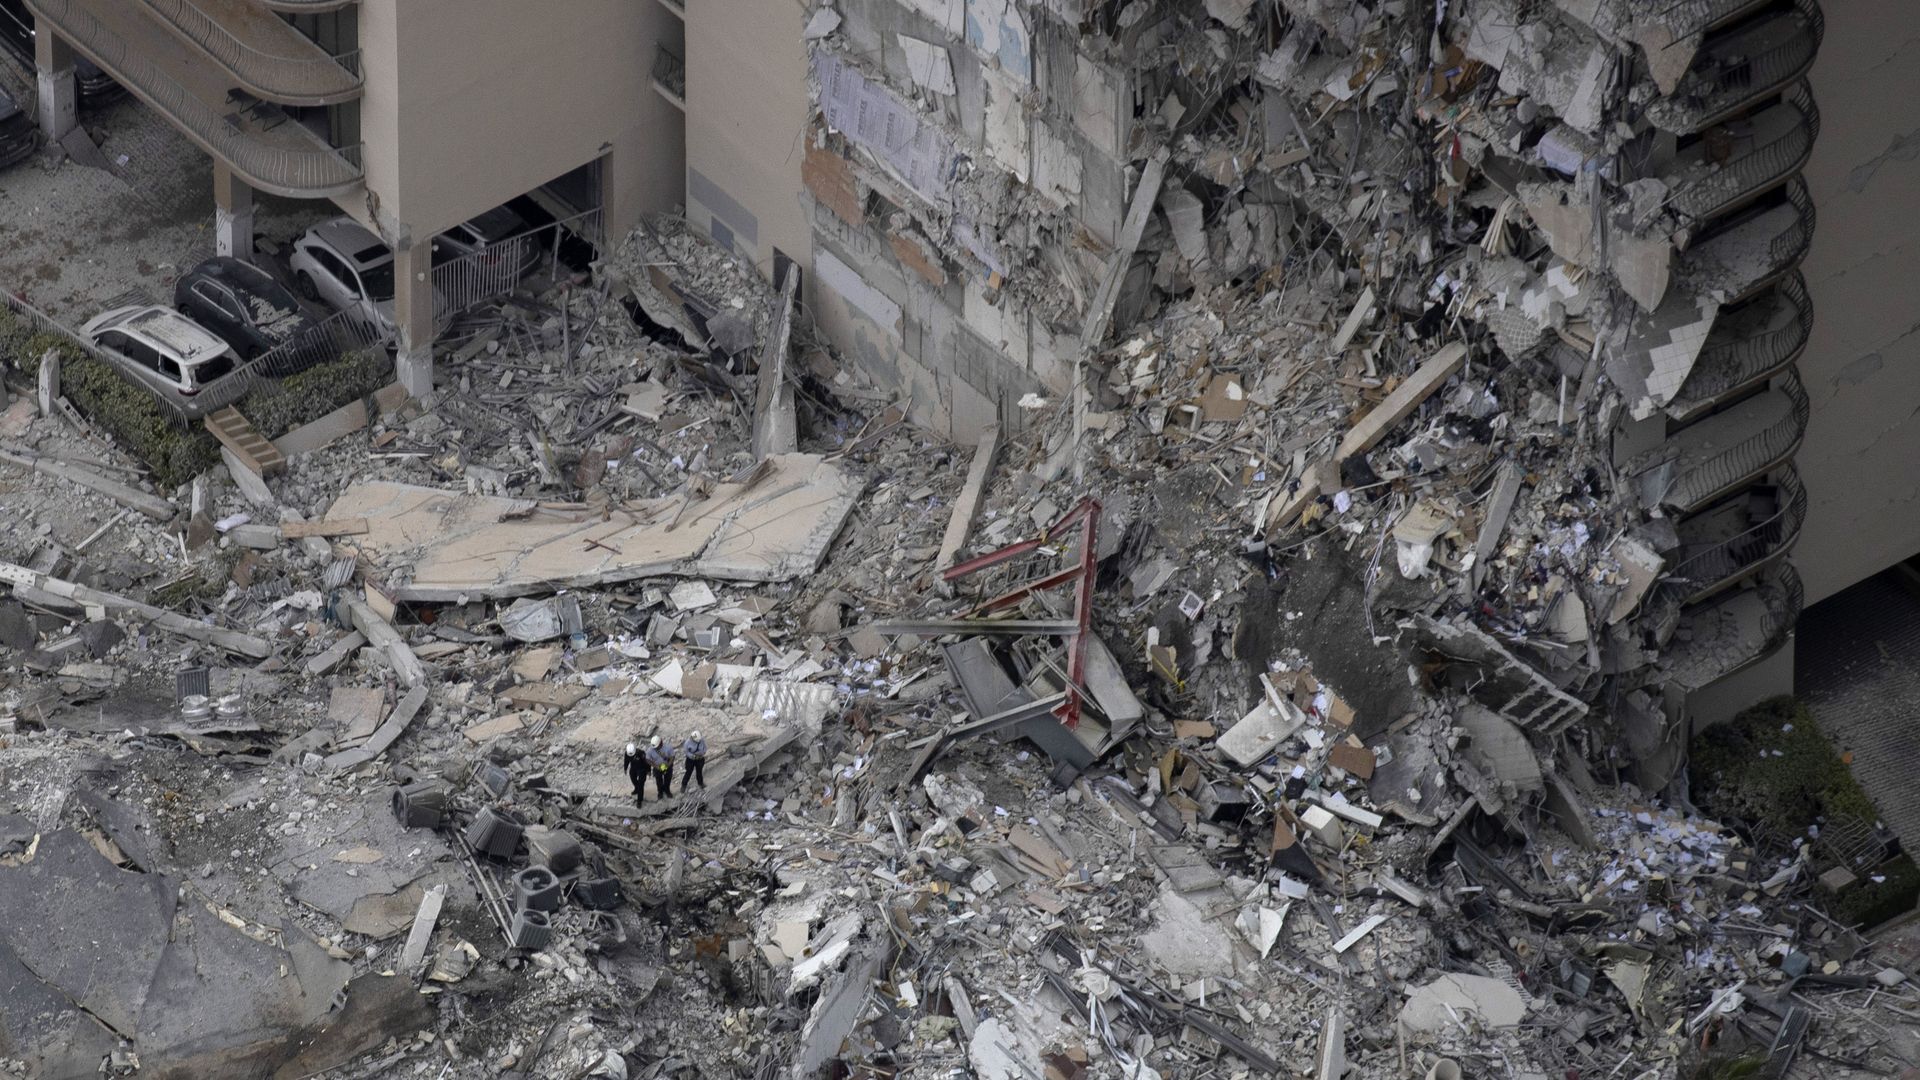 Search and rescue personnel with a K9 unit work in the rubble of a 12-story residential tower that partially collapsed on June 24, 2021 in Surfside, Florida.